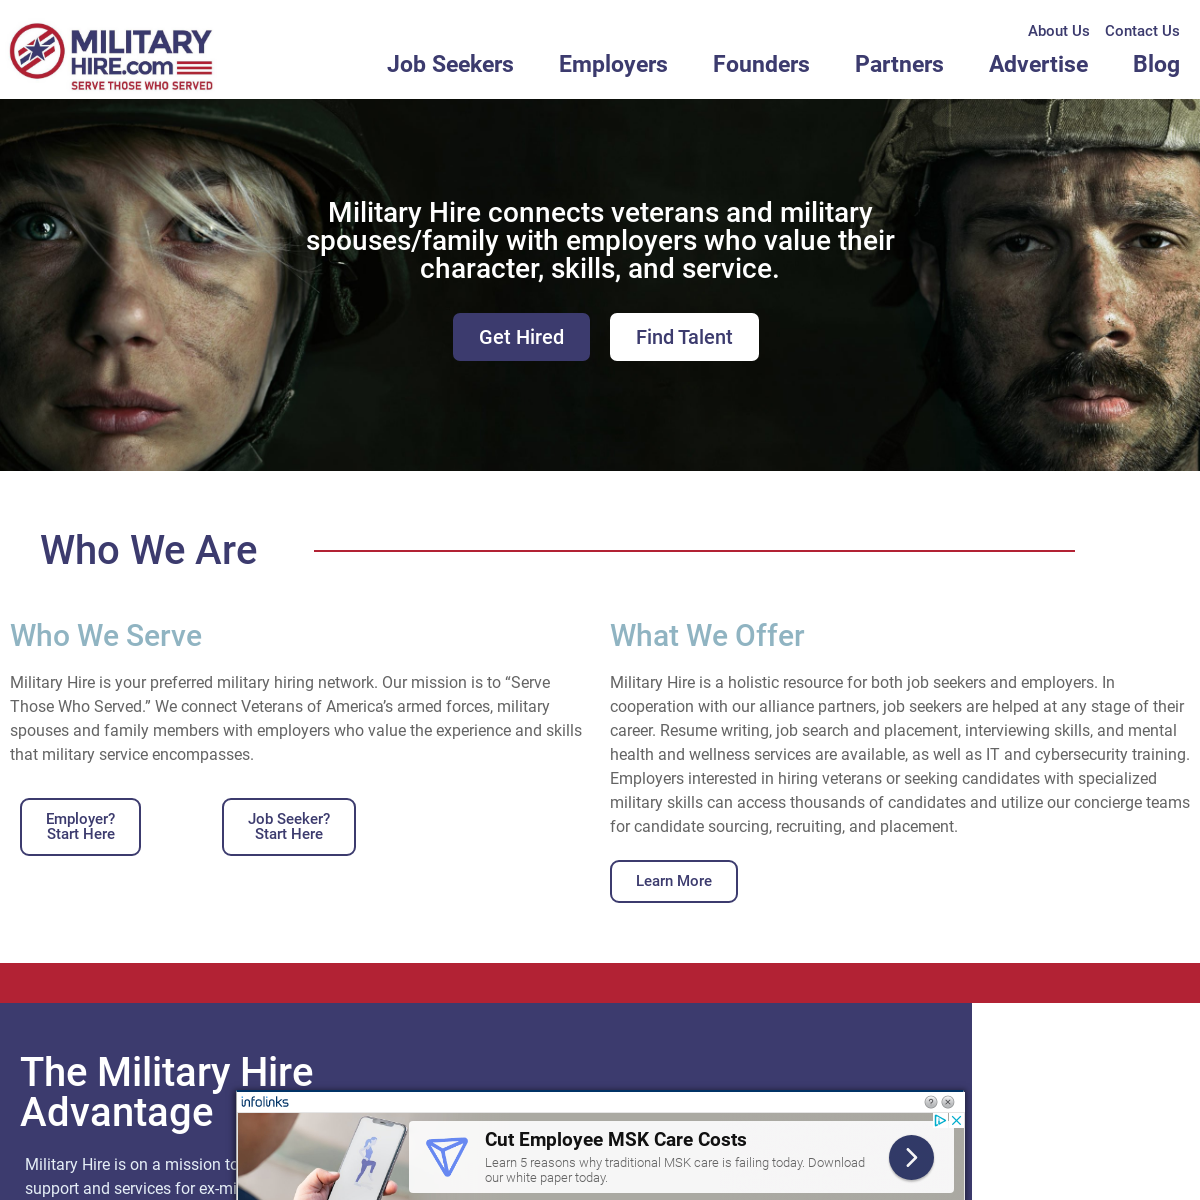 A complete backup of militaryhire.com